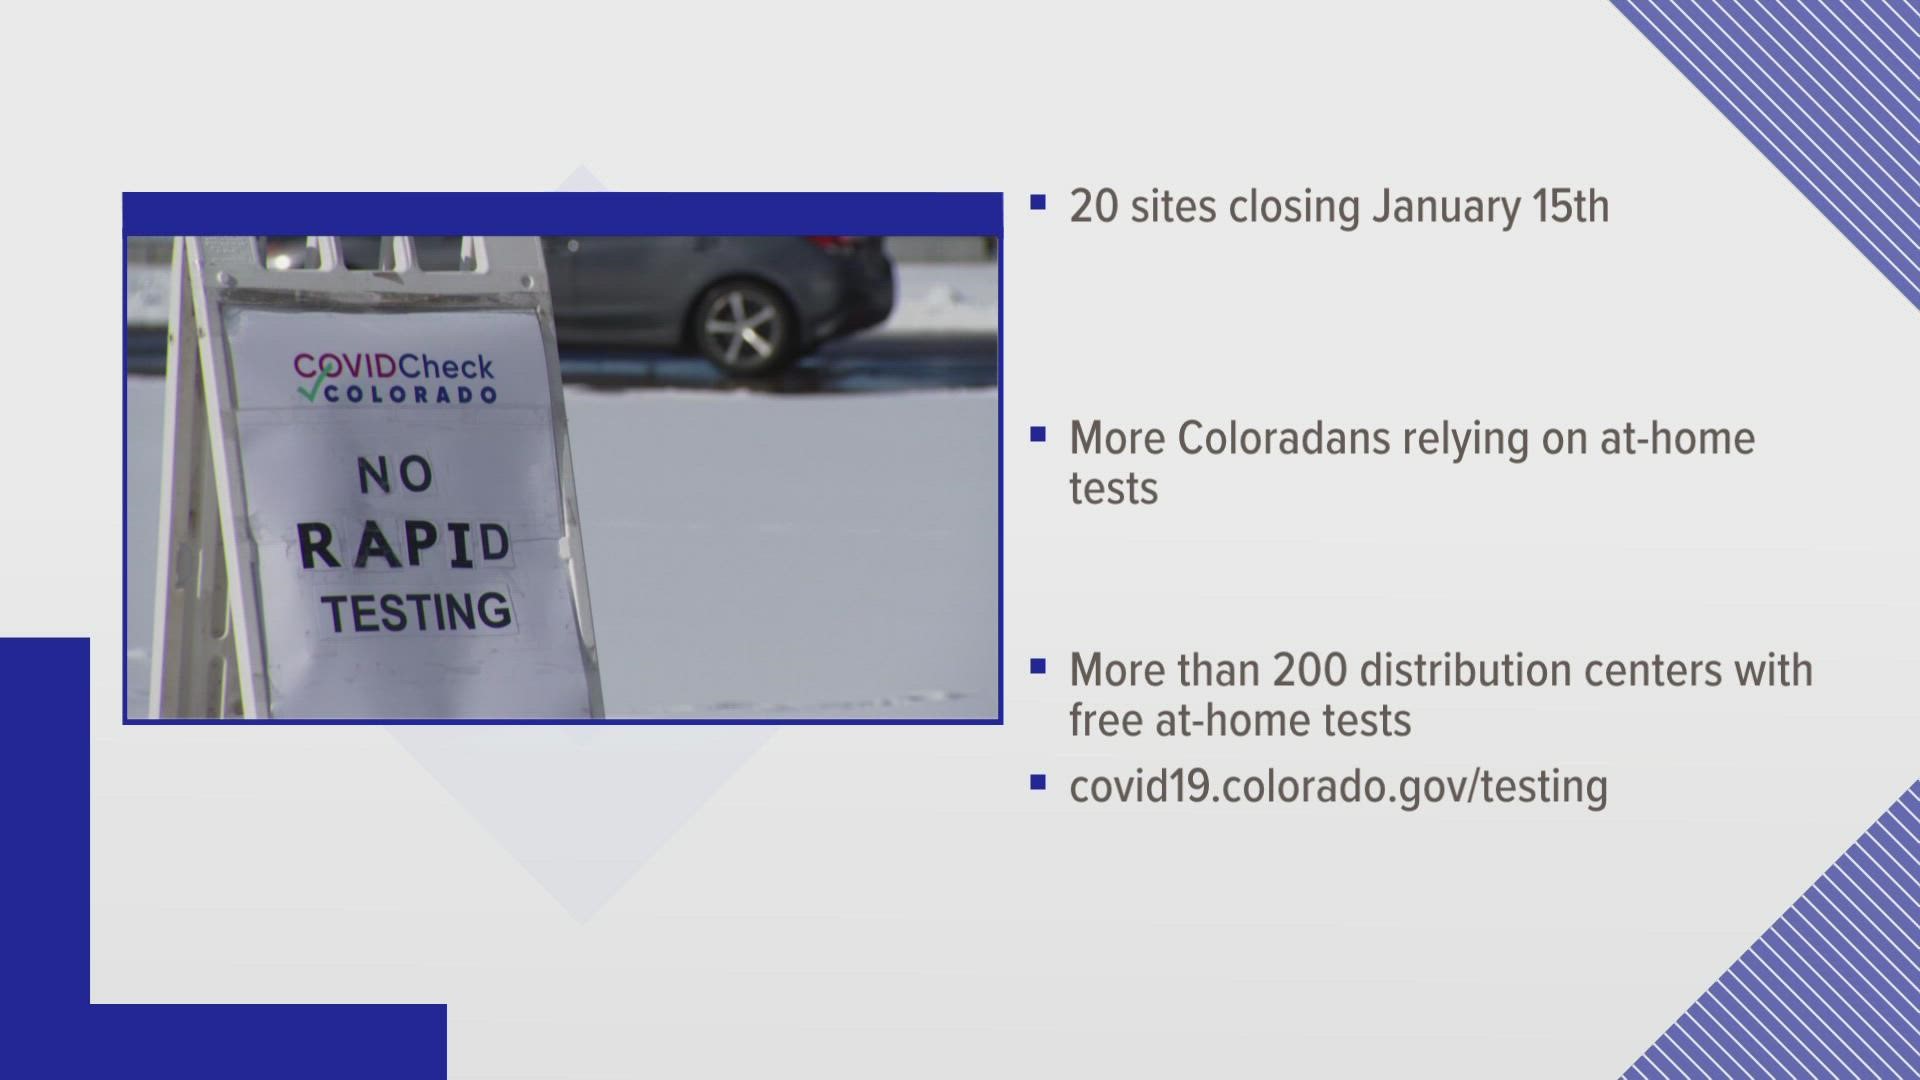 CDPHE said the closures come as Coloradans increasingly rely on at-home tests and demand for testing is at an all-time low.